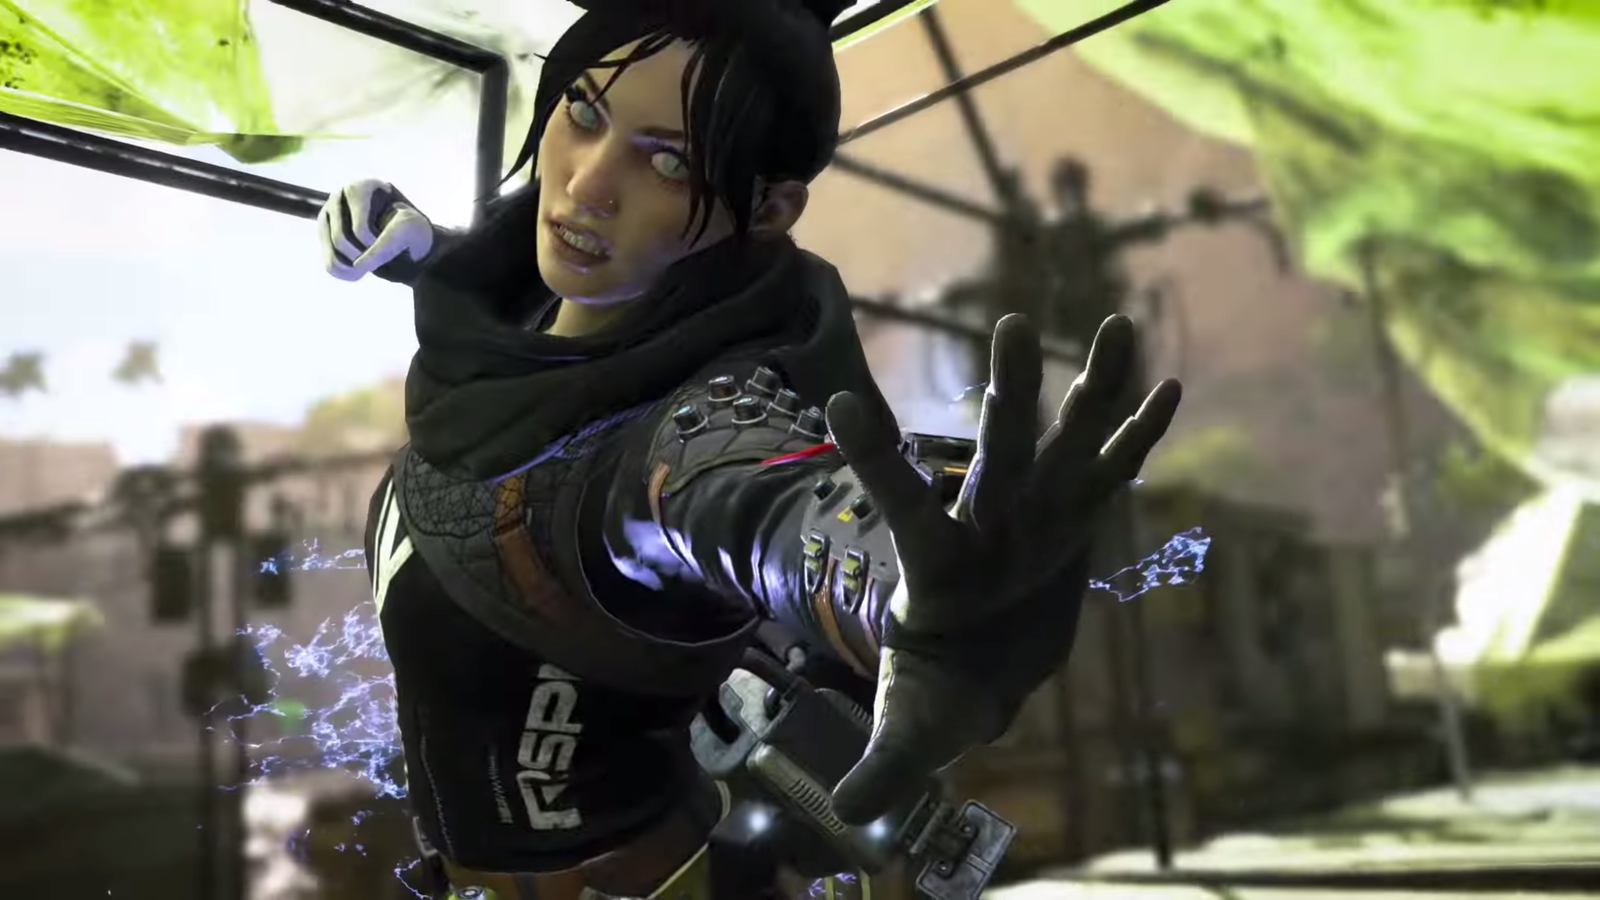 Wraith And Bloodhound's Backstories Are Apex Legends' Best Mystery